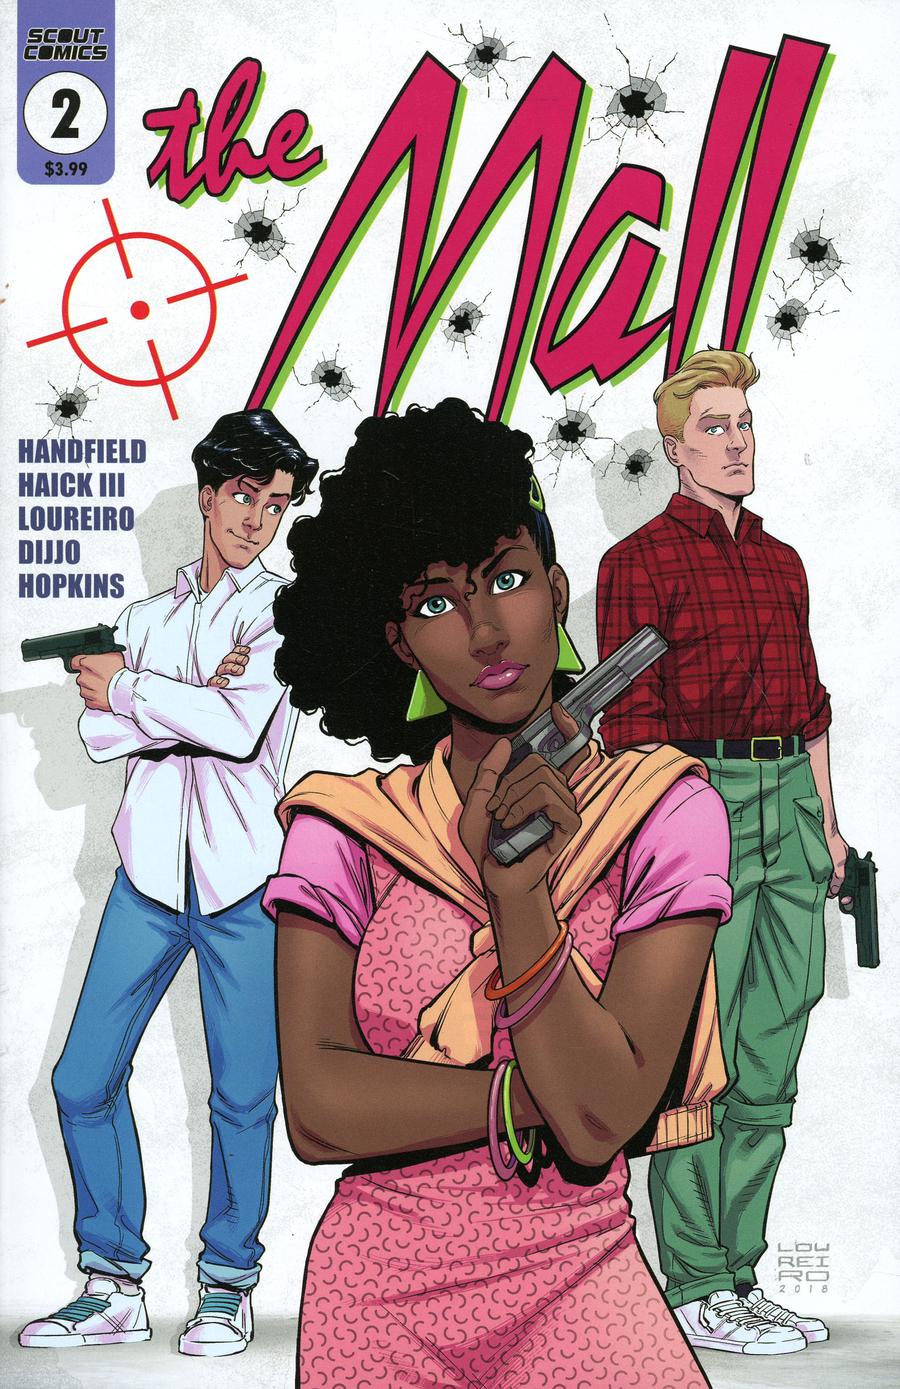 Mall (Scout Comics) #2 Cover A Regular Cover